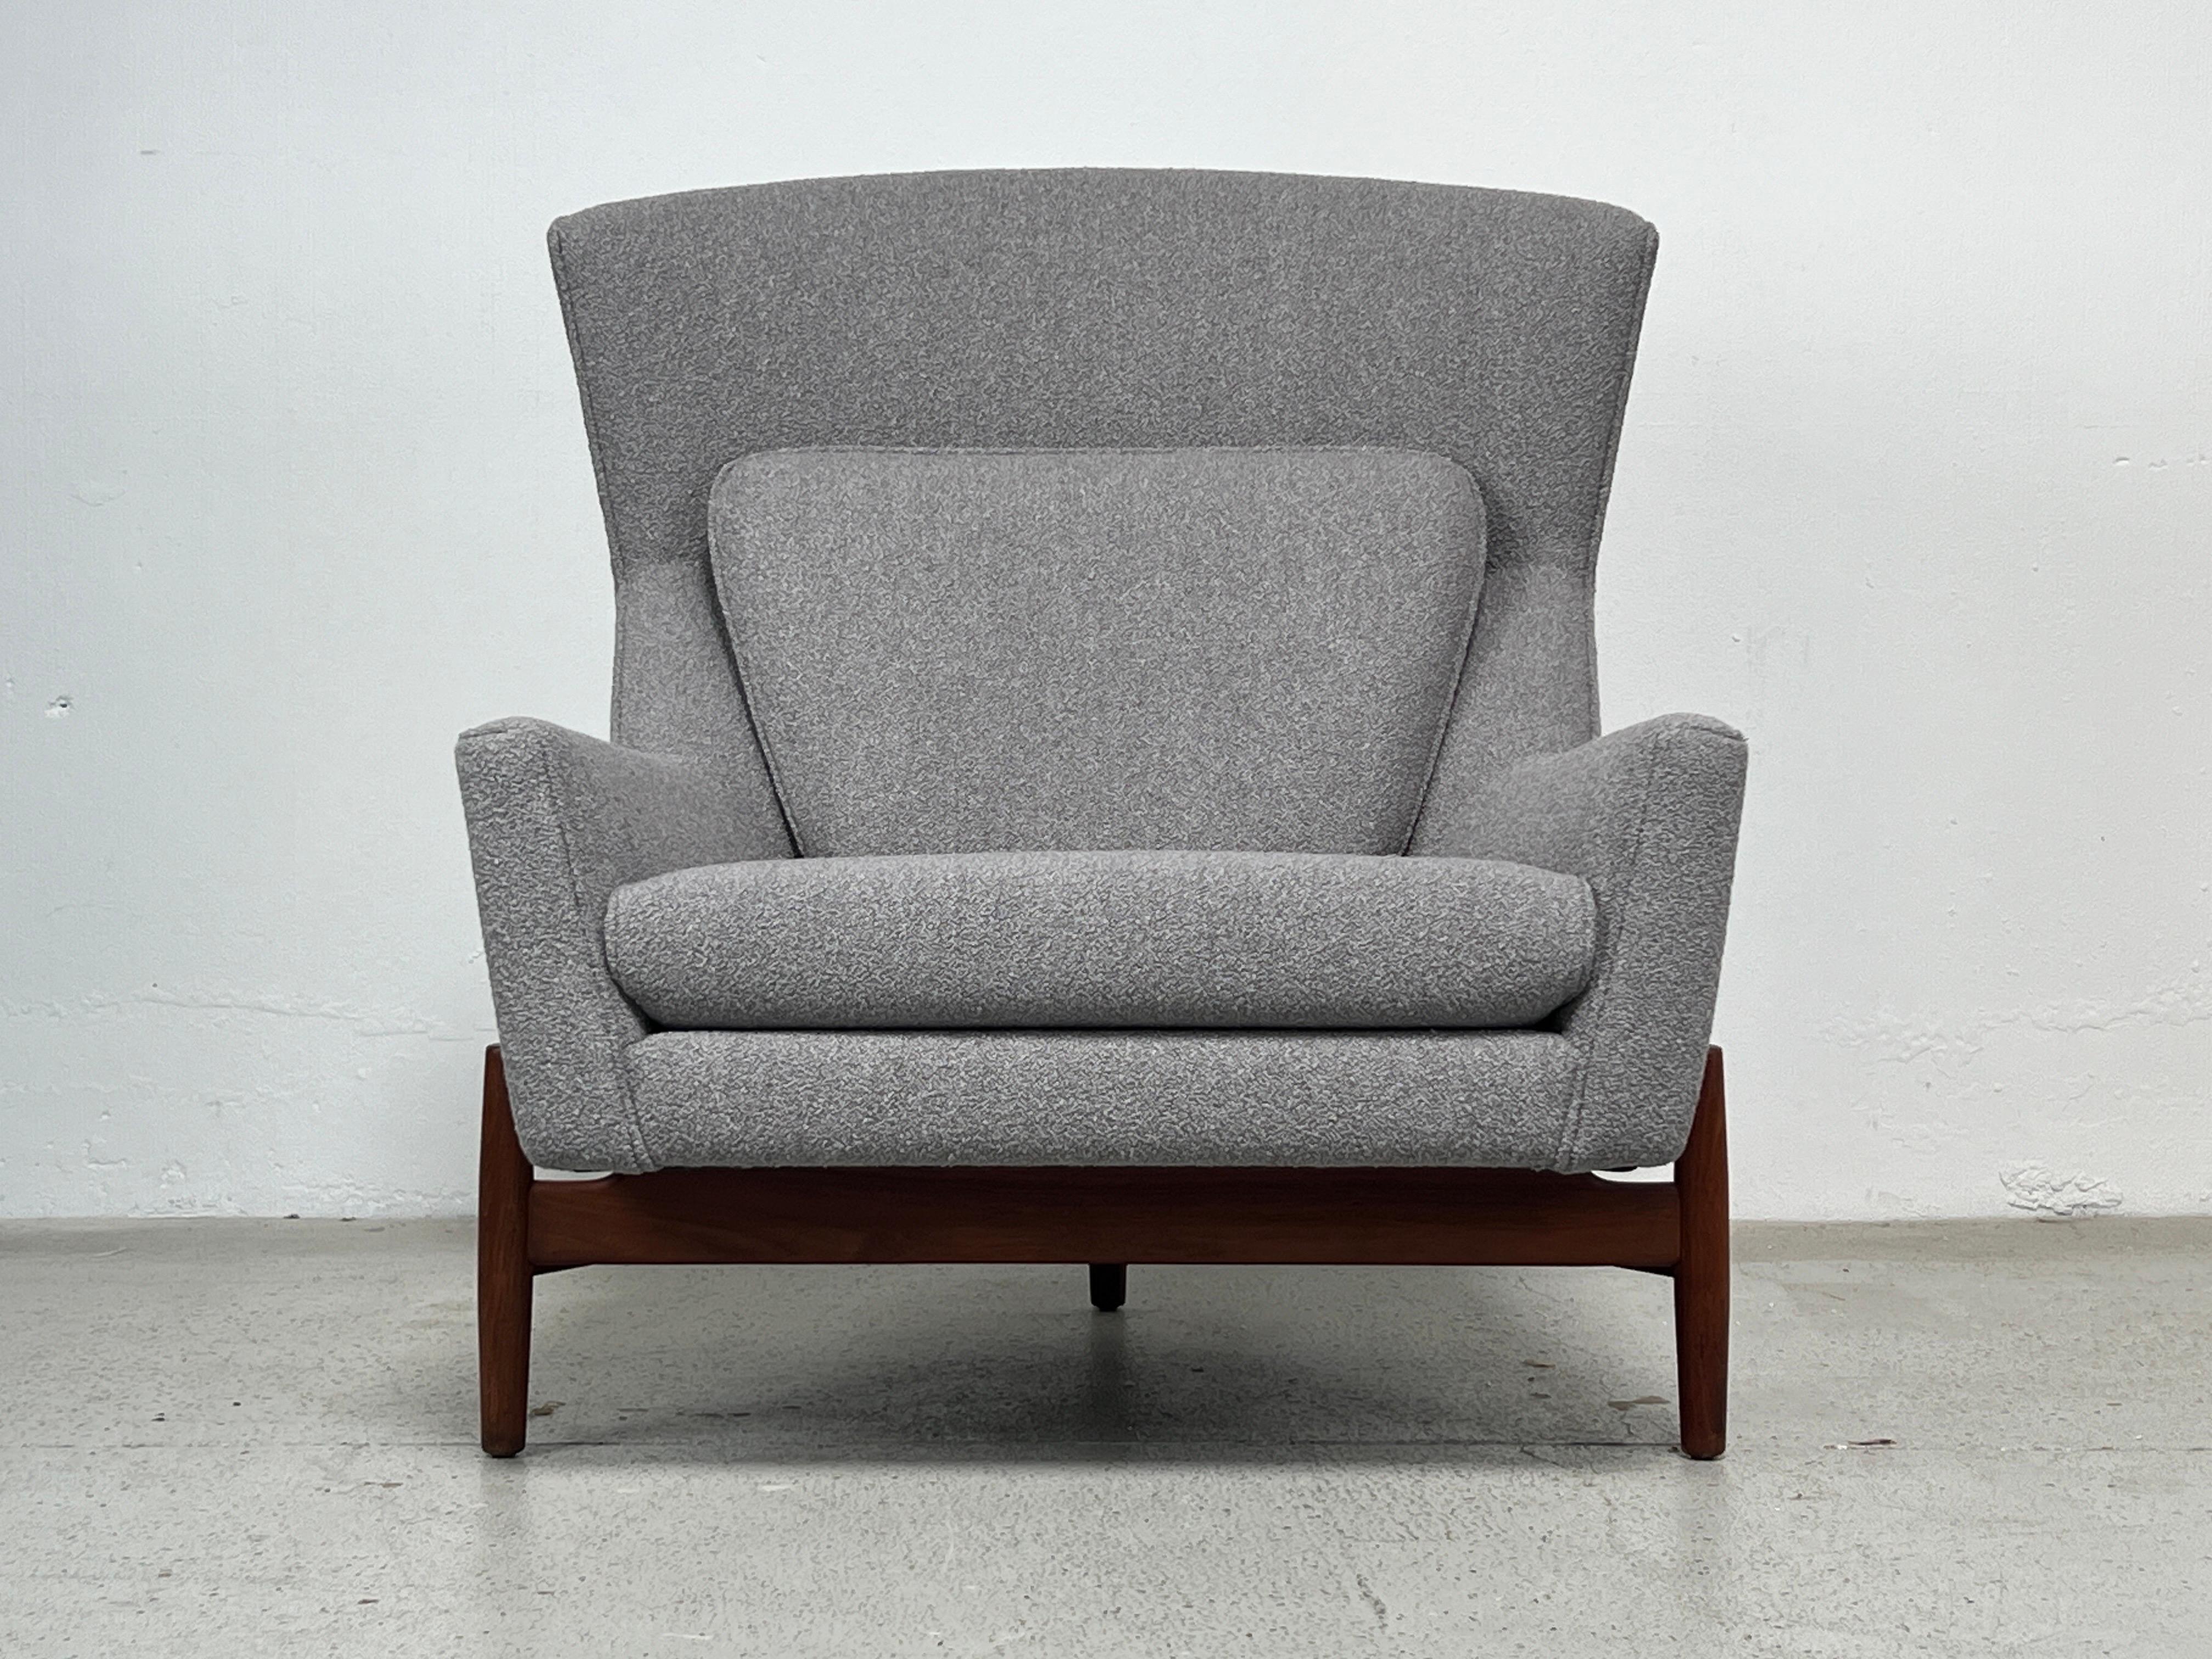 A rare lounge chair designed by Jens Risom for Risom Designs, Inc. Beautifully restored with refinished walnut base and upholstered in
Holly Hunt fabric. 